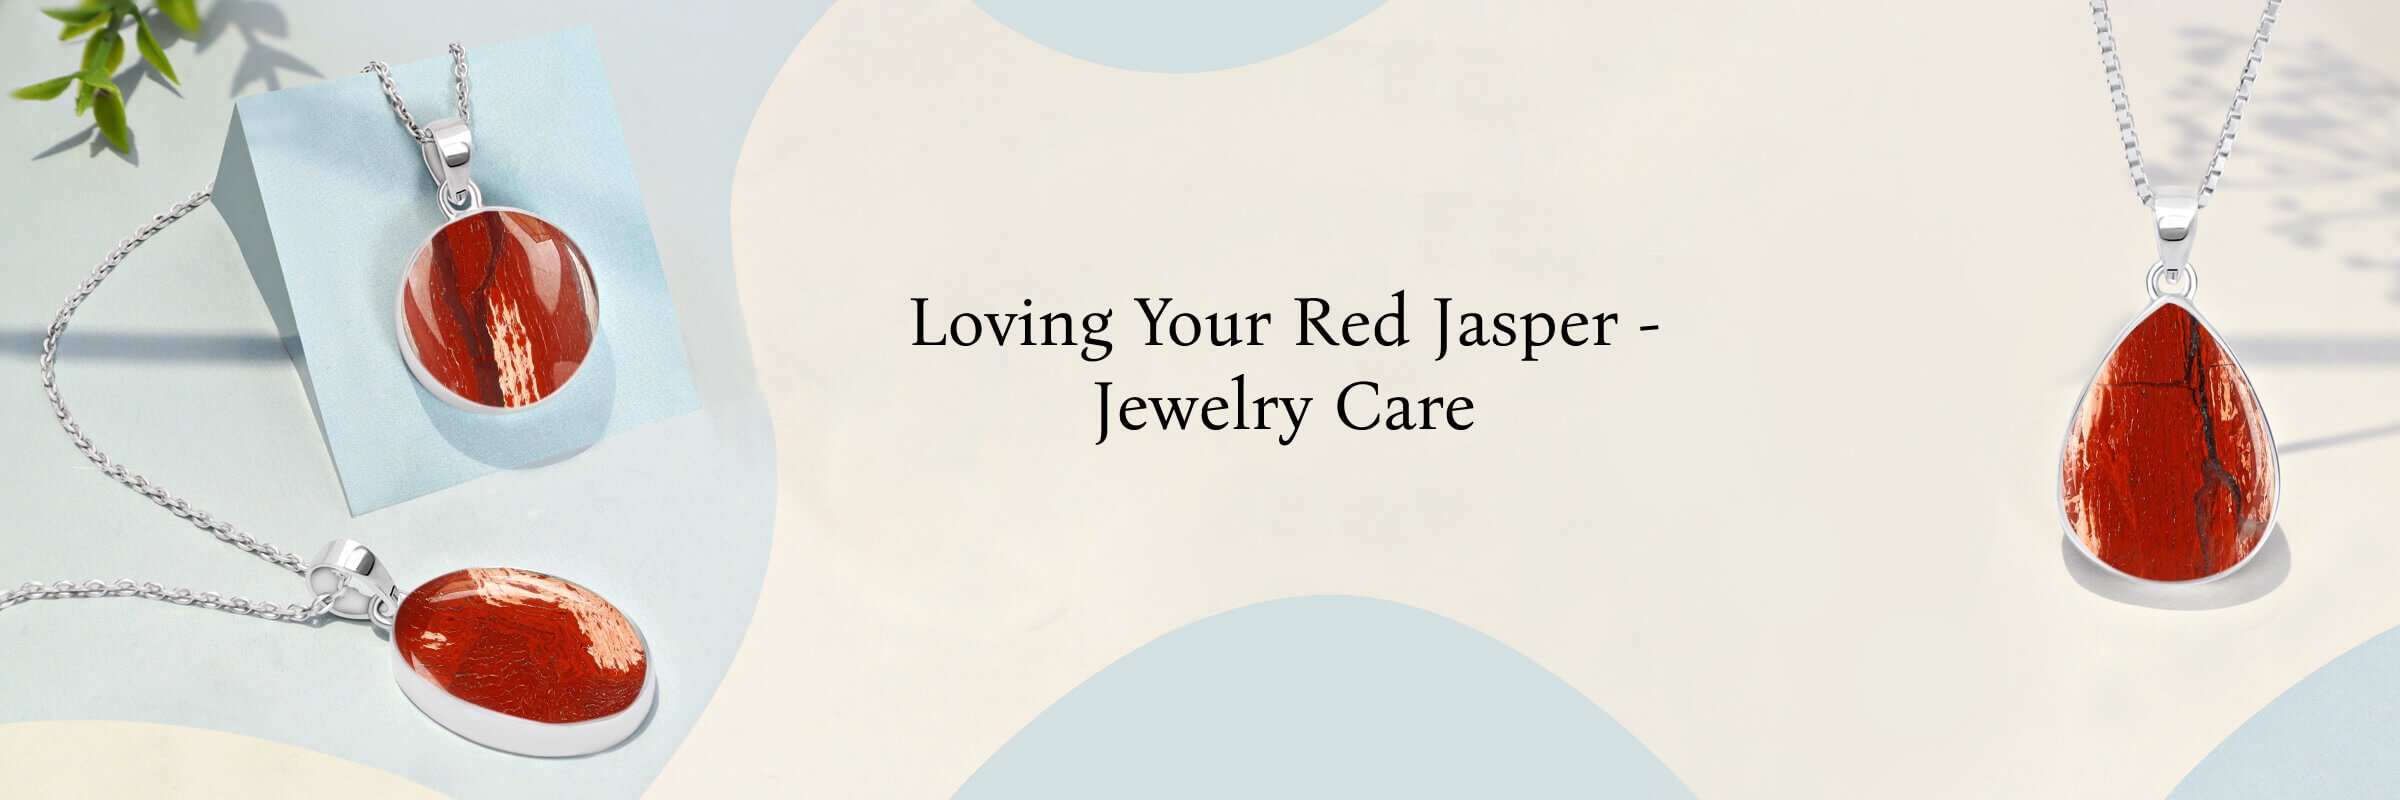 How to Care & Maintain Your Red Jasper Sterling Silver Jewelry